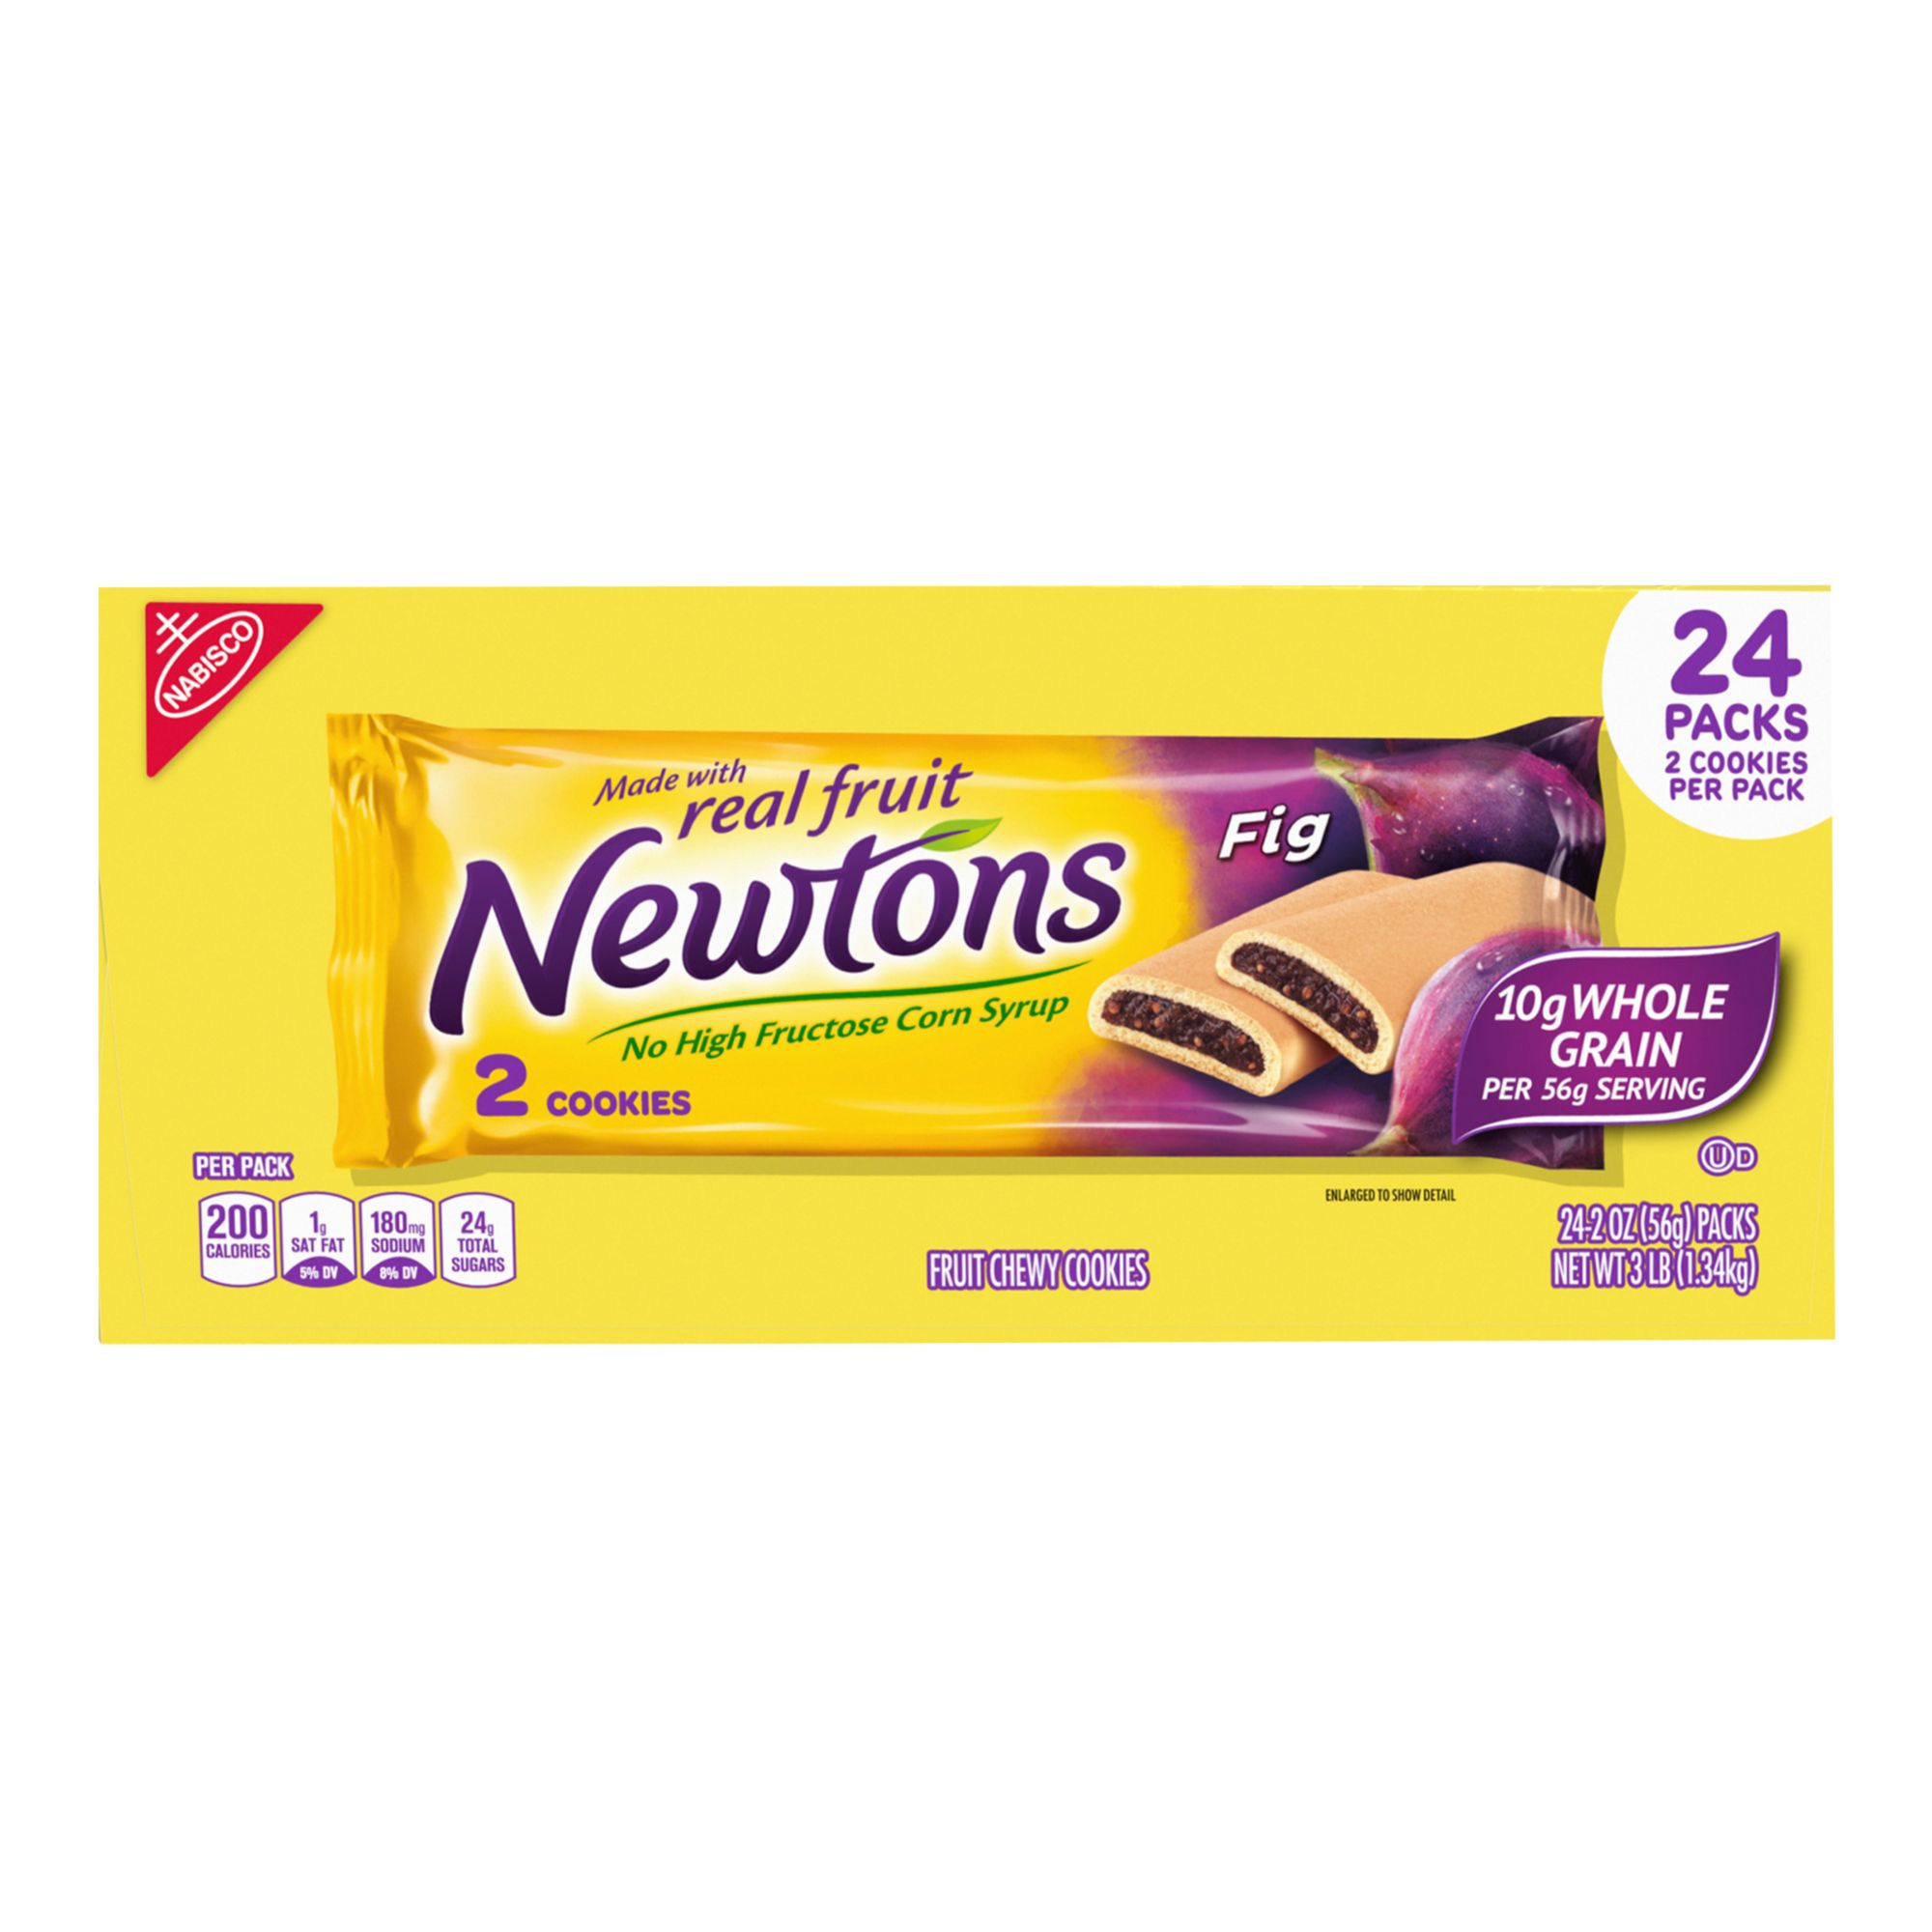 Newtons Soft & Chewy Fig Cookies Snack Packs, 24 pk.